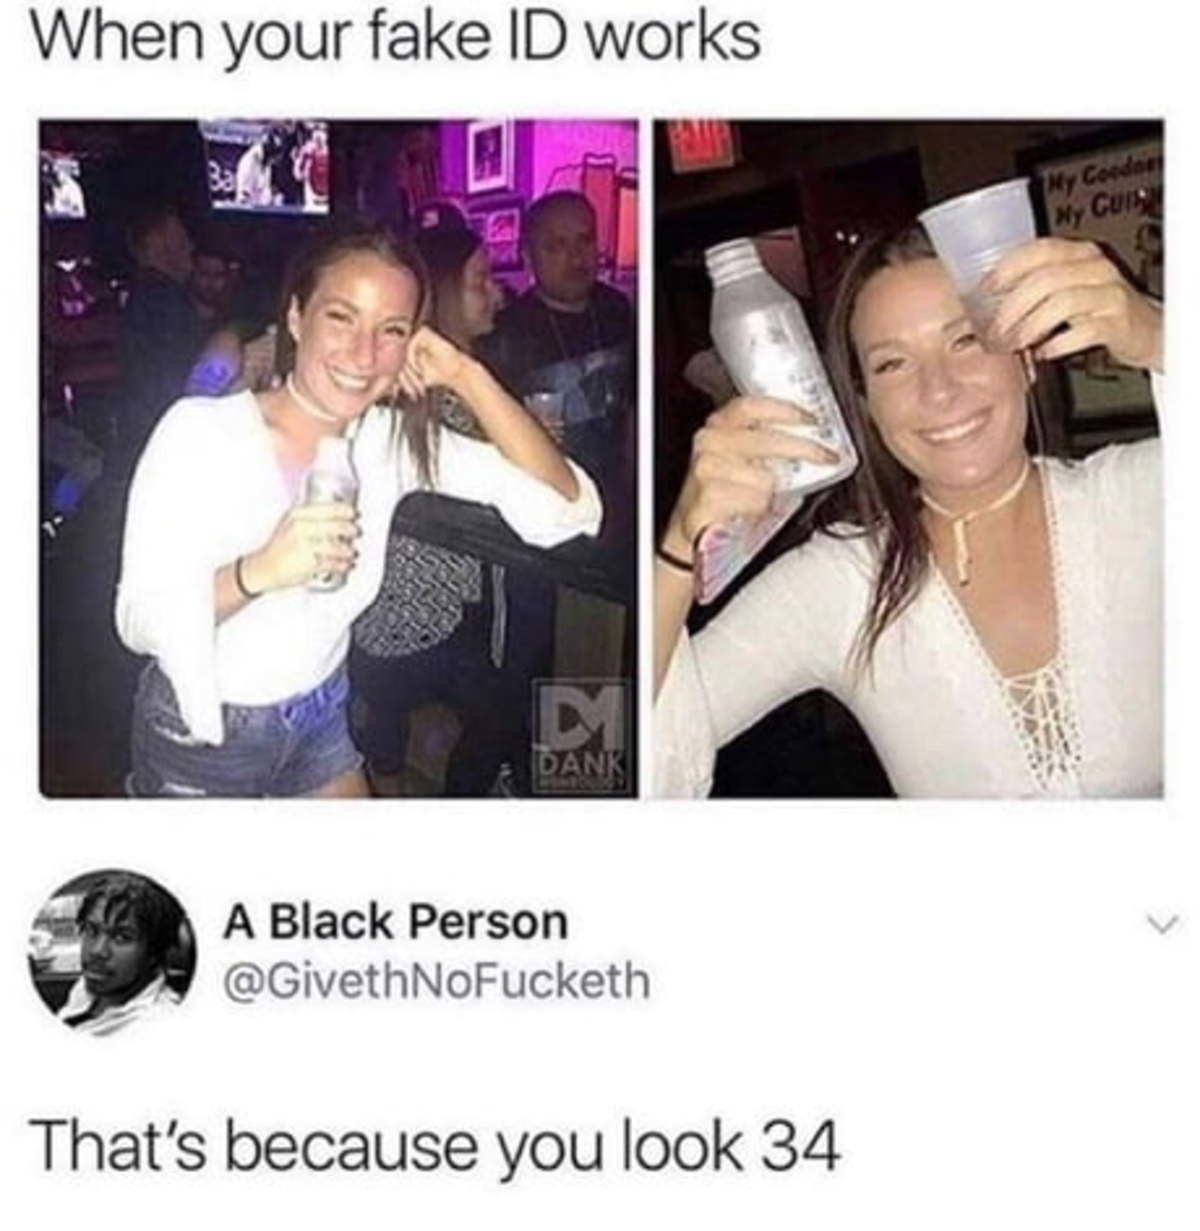 your fake id works - When your fake Id works Dank A Black Person NoFucketh That's because you look 34